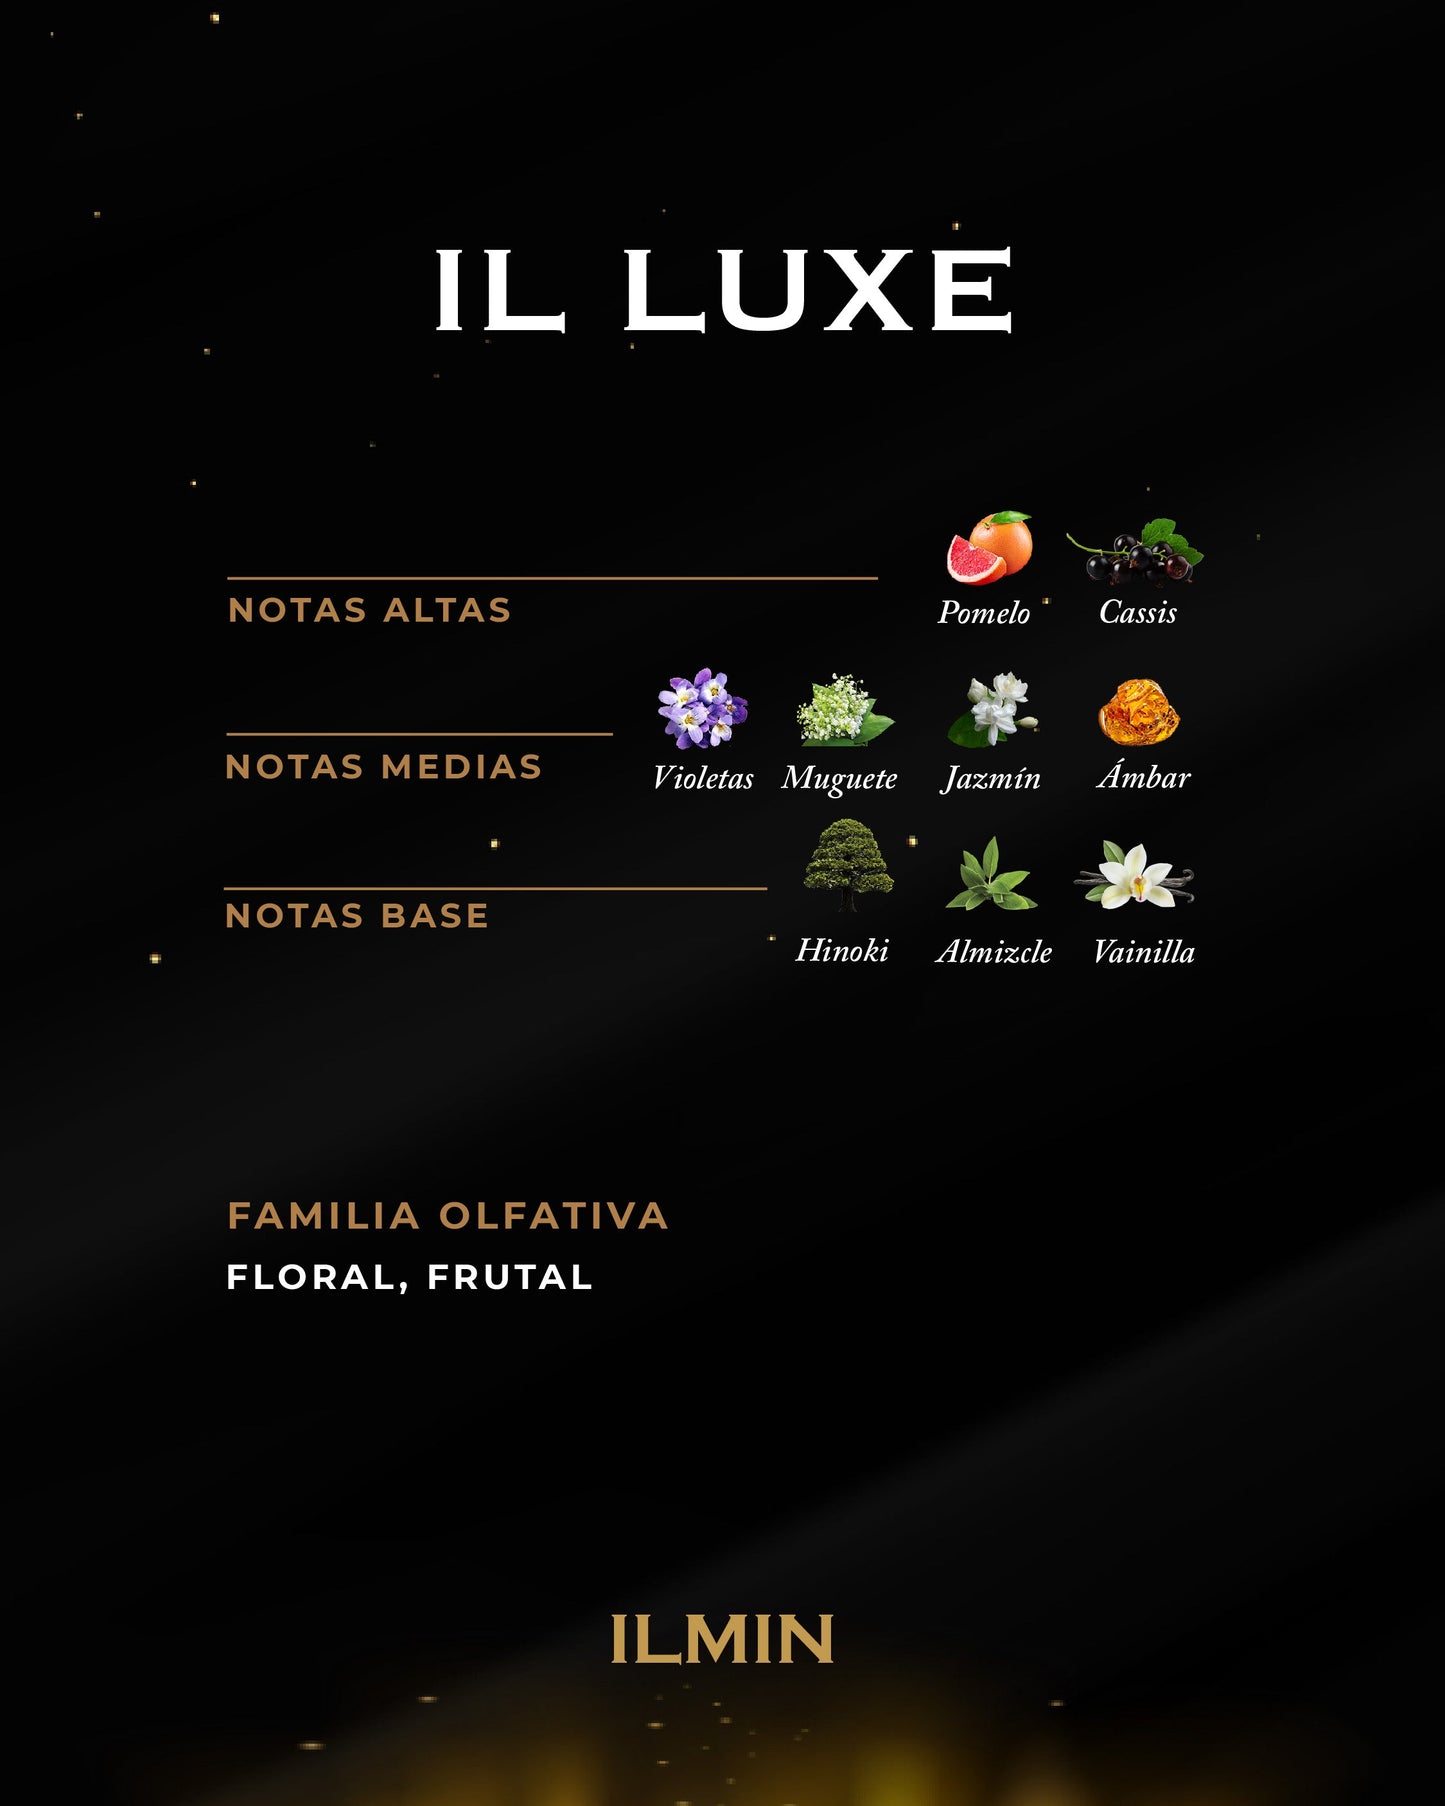 IL LUXE